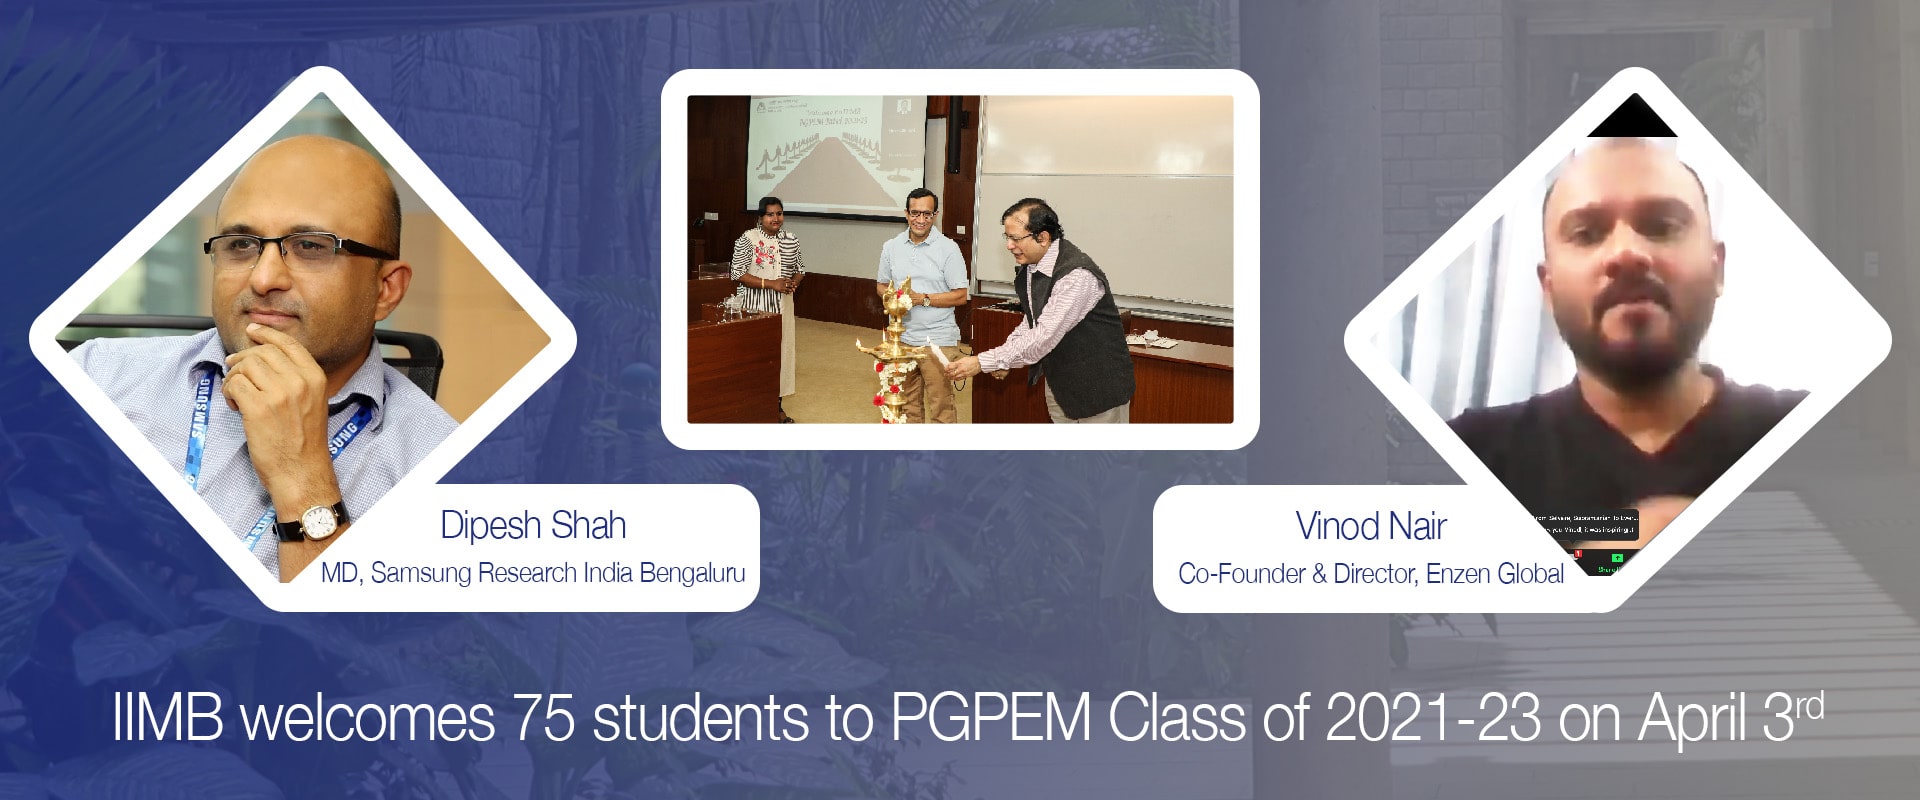 IIMB welcomes 75 students to PGPEM Class of 2021-23 on April 3rd